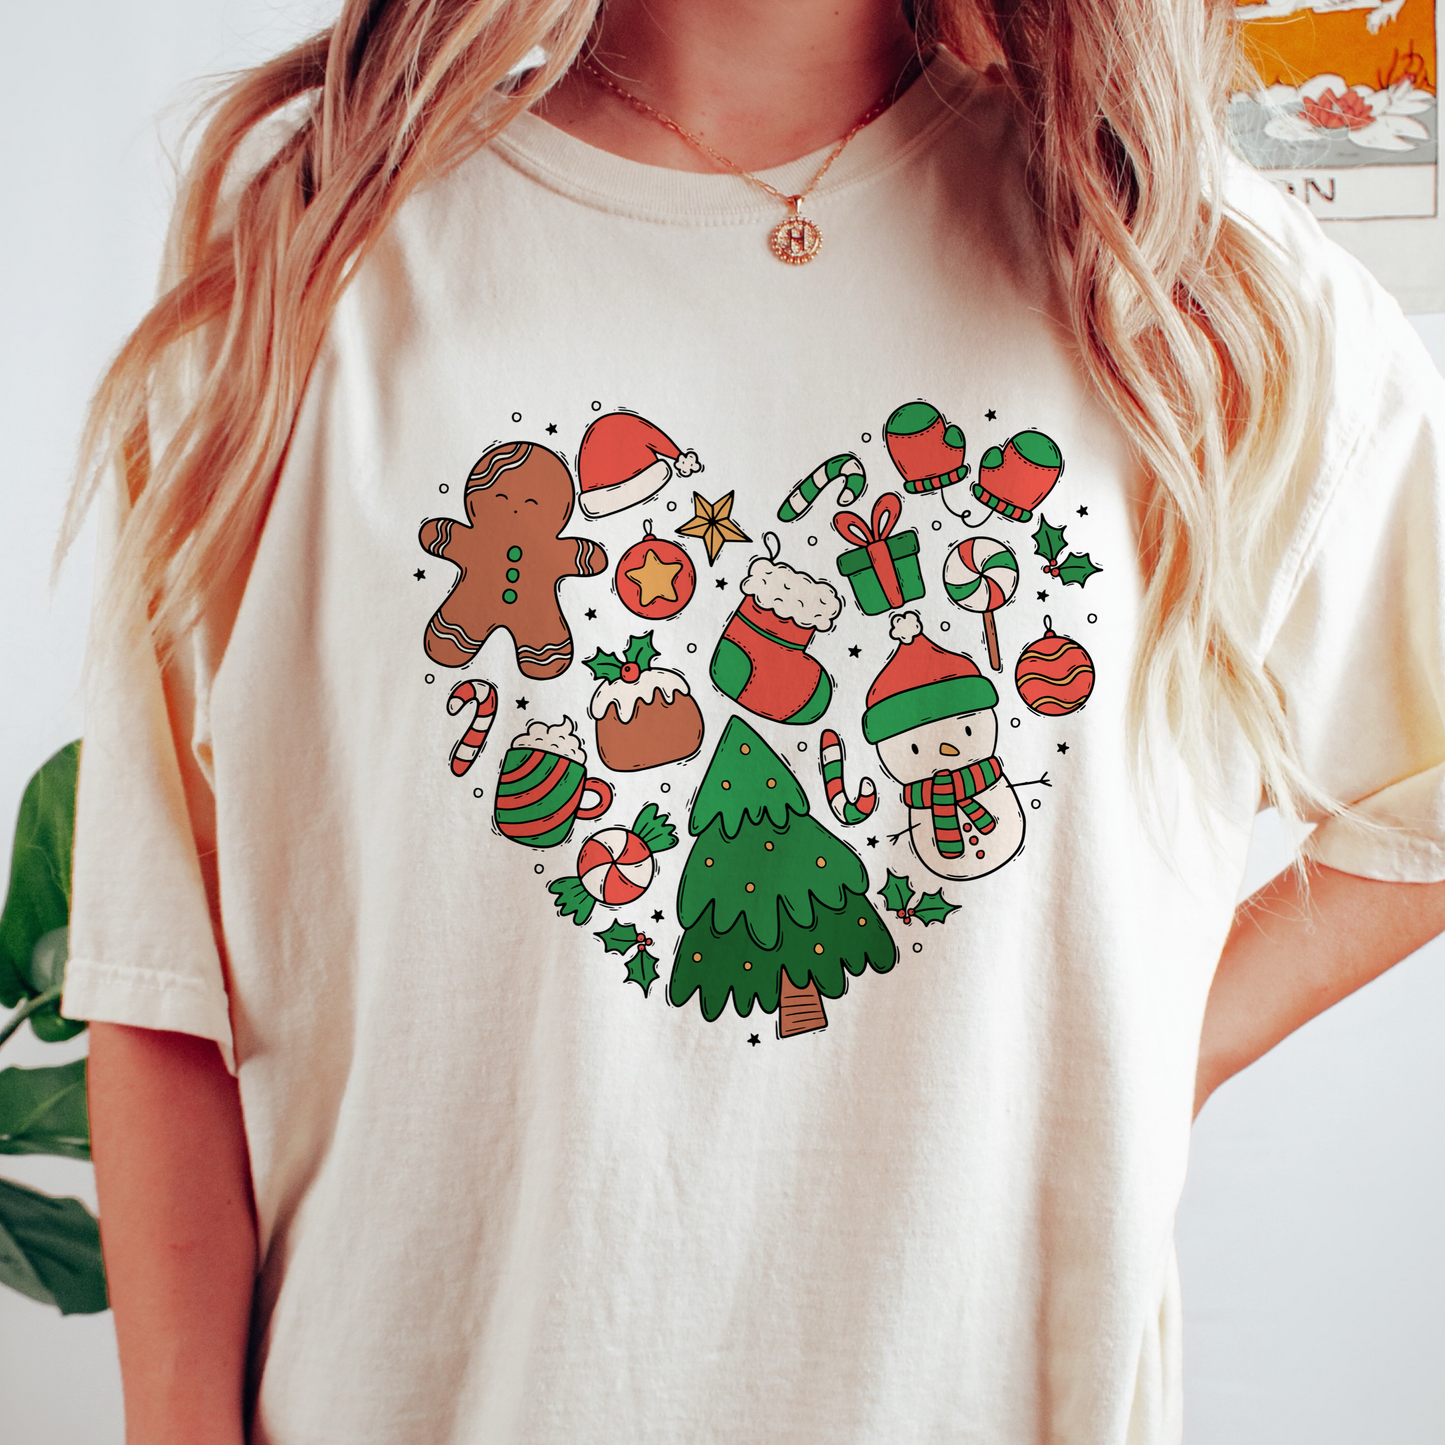 Christmas Heart Collage T shirt in Comfort Colour